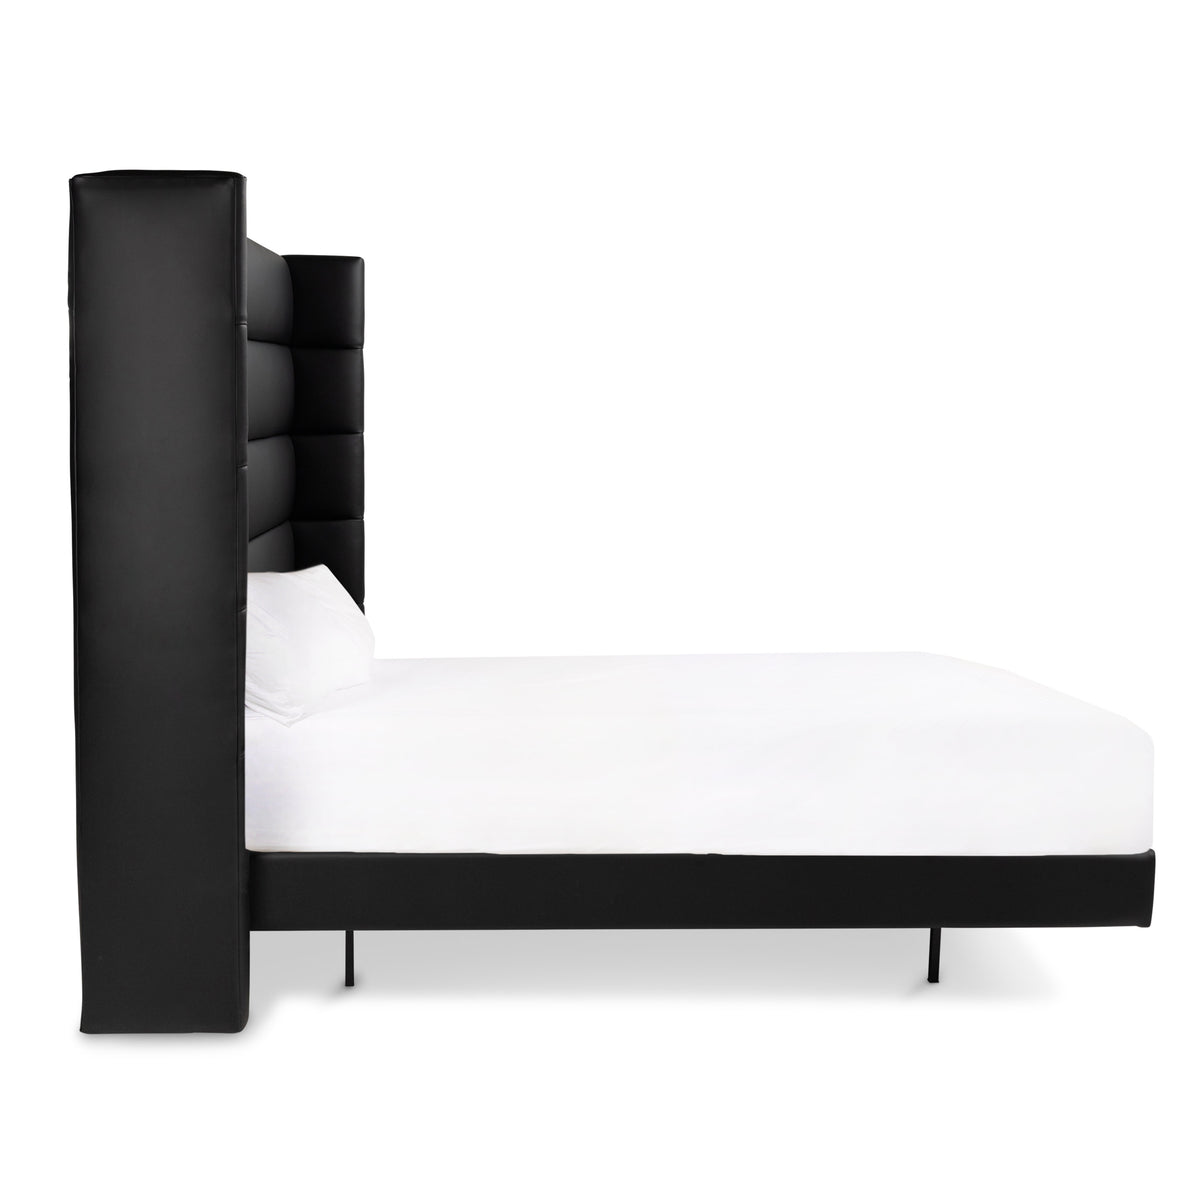 Madrid Bed in Black Faux Leather